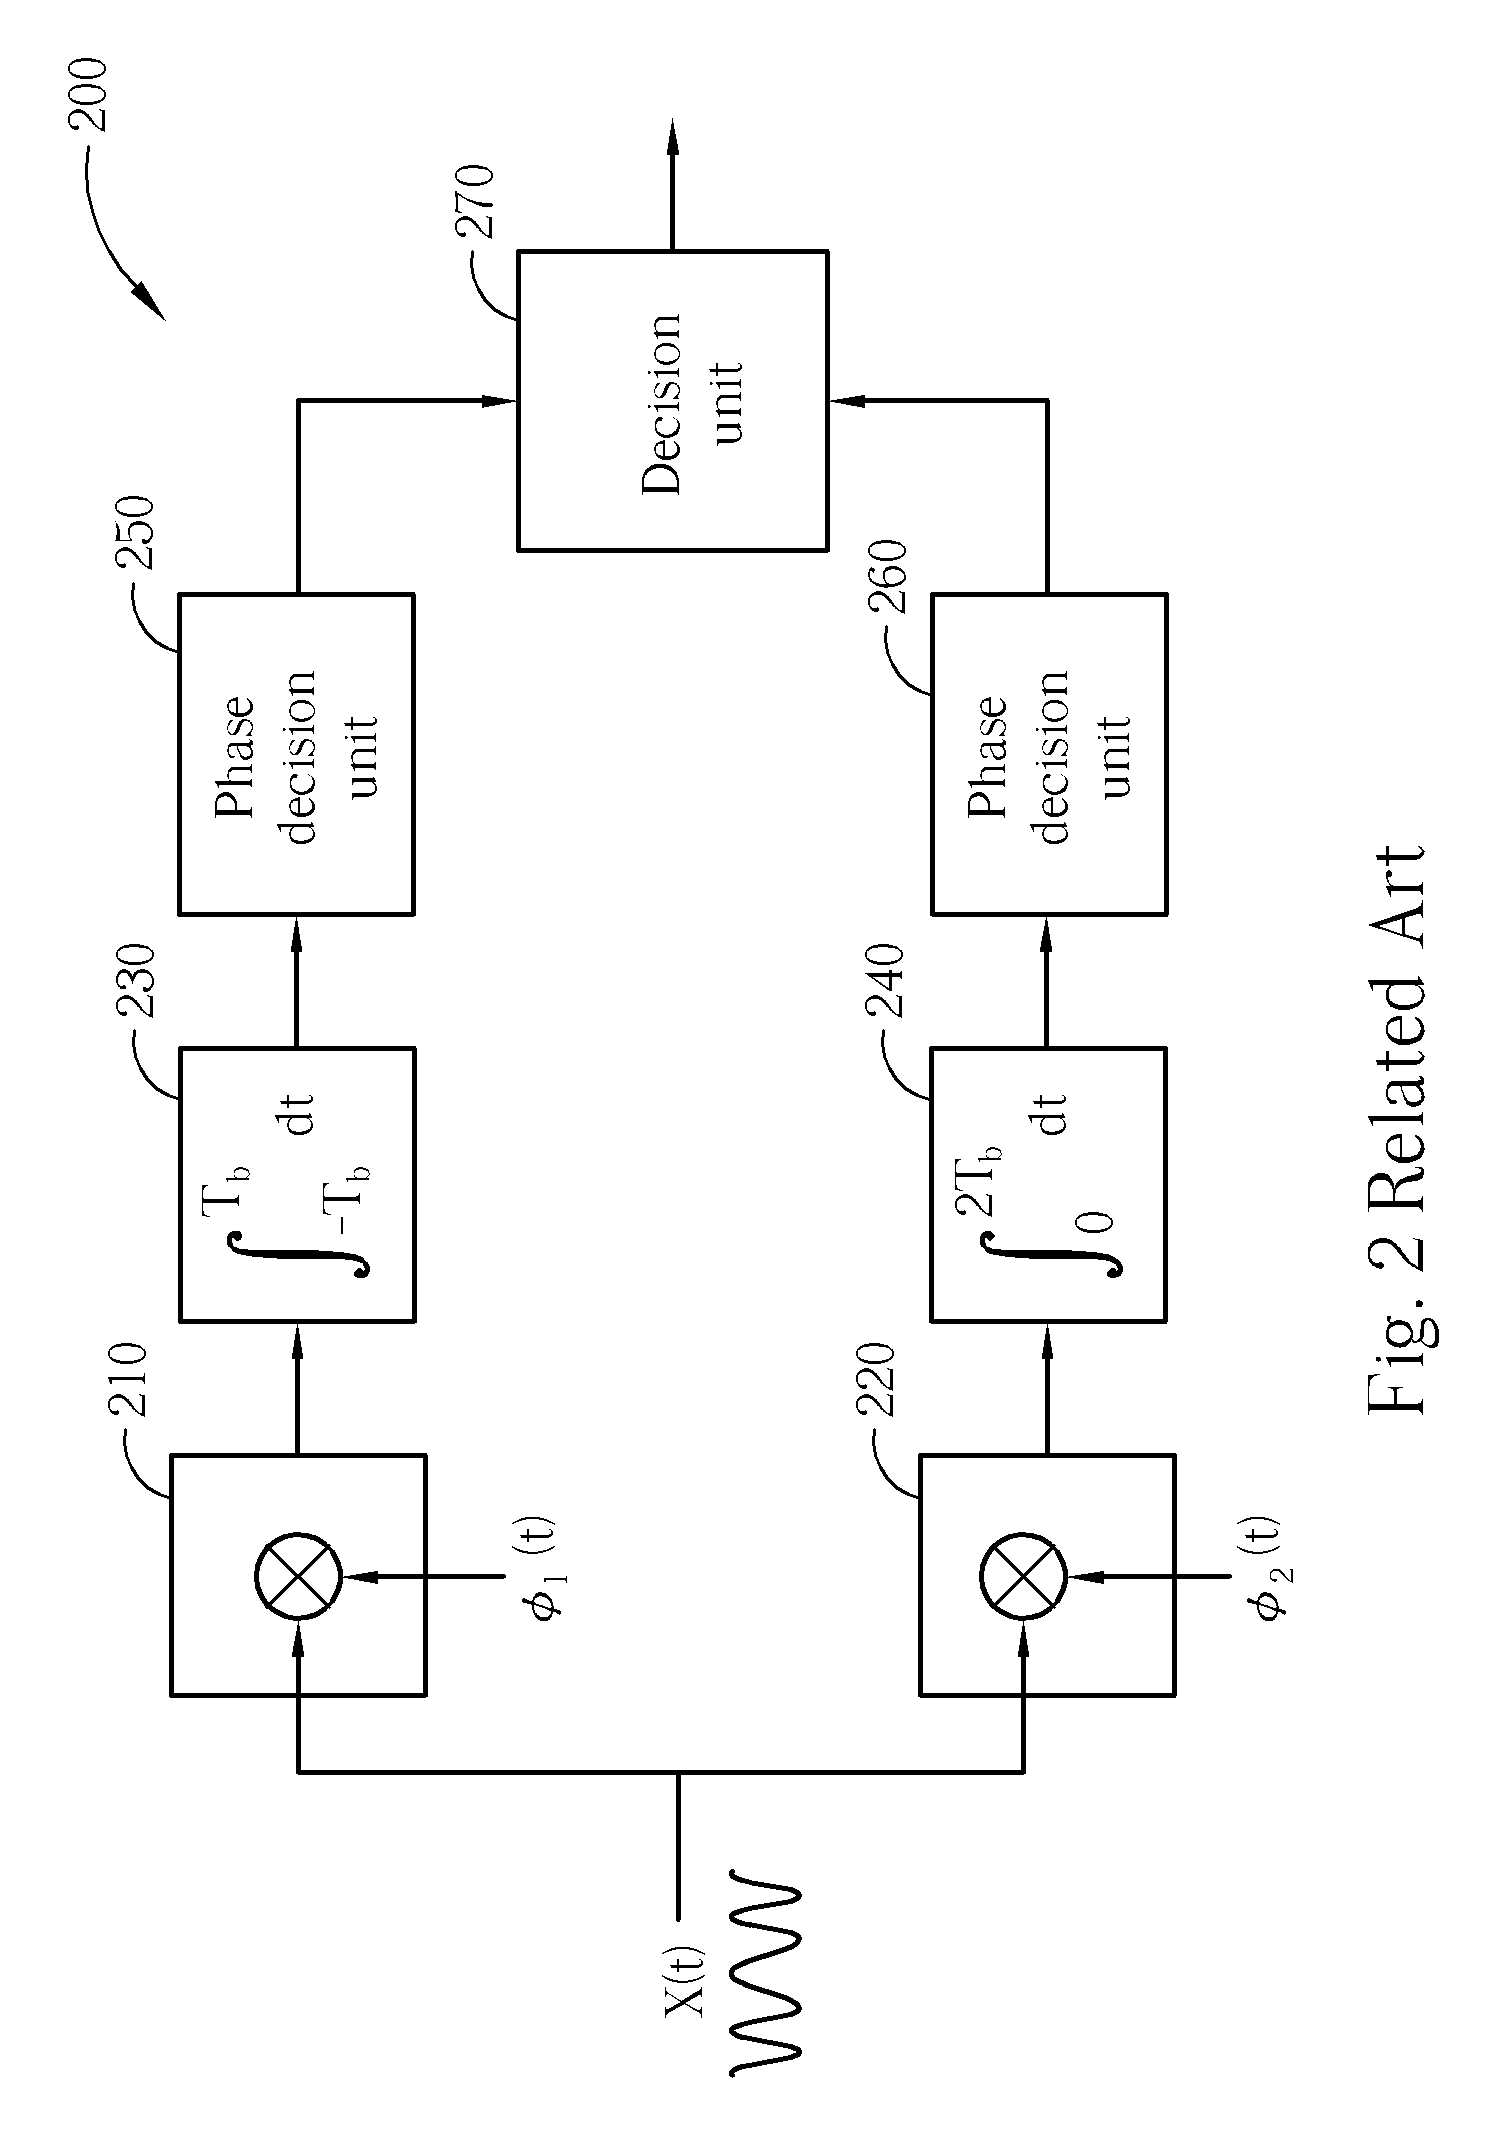 Method and apparatus for detecting specific signal pattern in a signal read from an optical disc